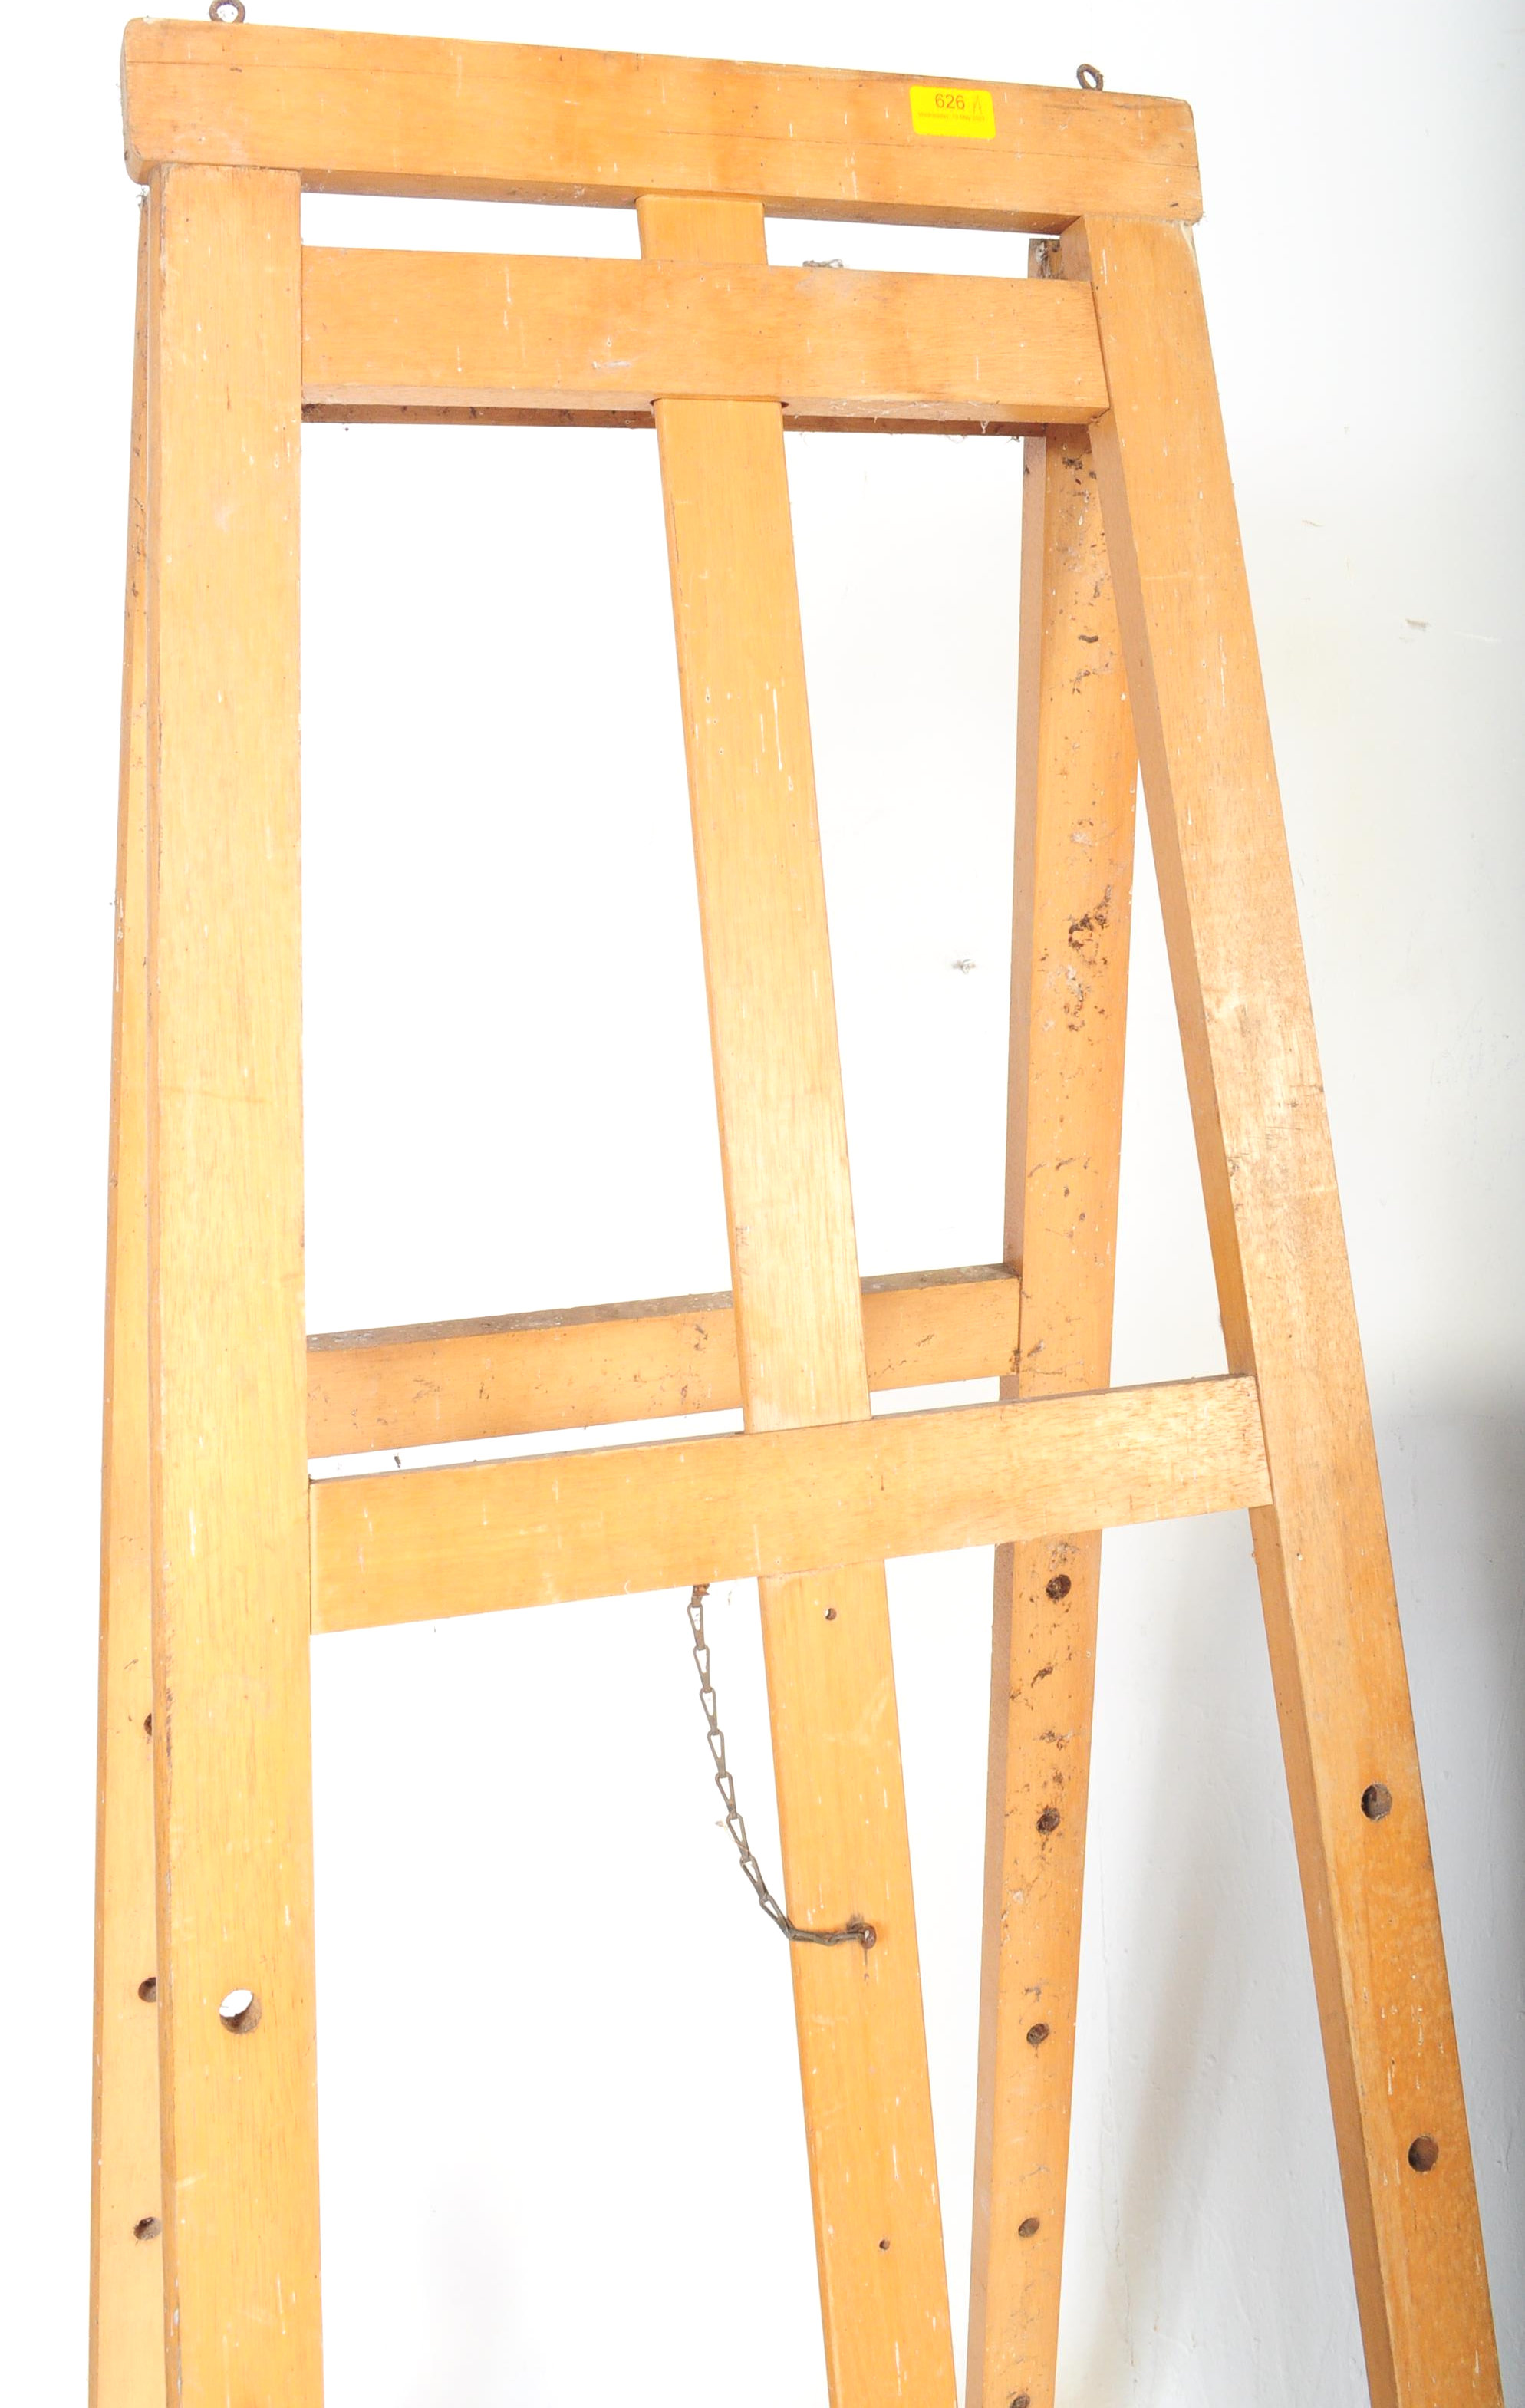 A LARGE VINTAGE RETRO 1970'S BEECH WOOD ARTIST EASEL - Image 4 of 5